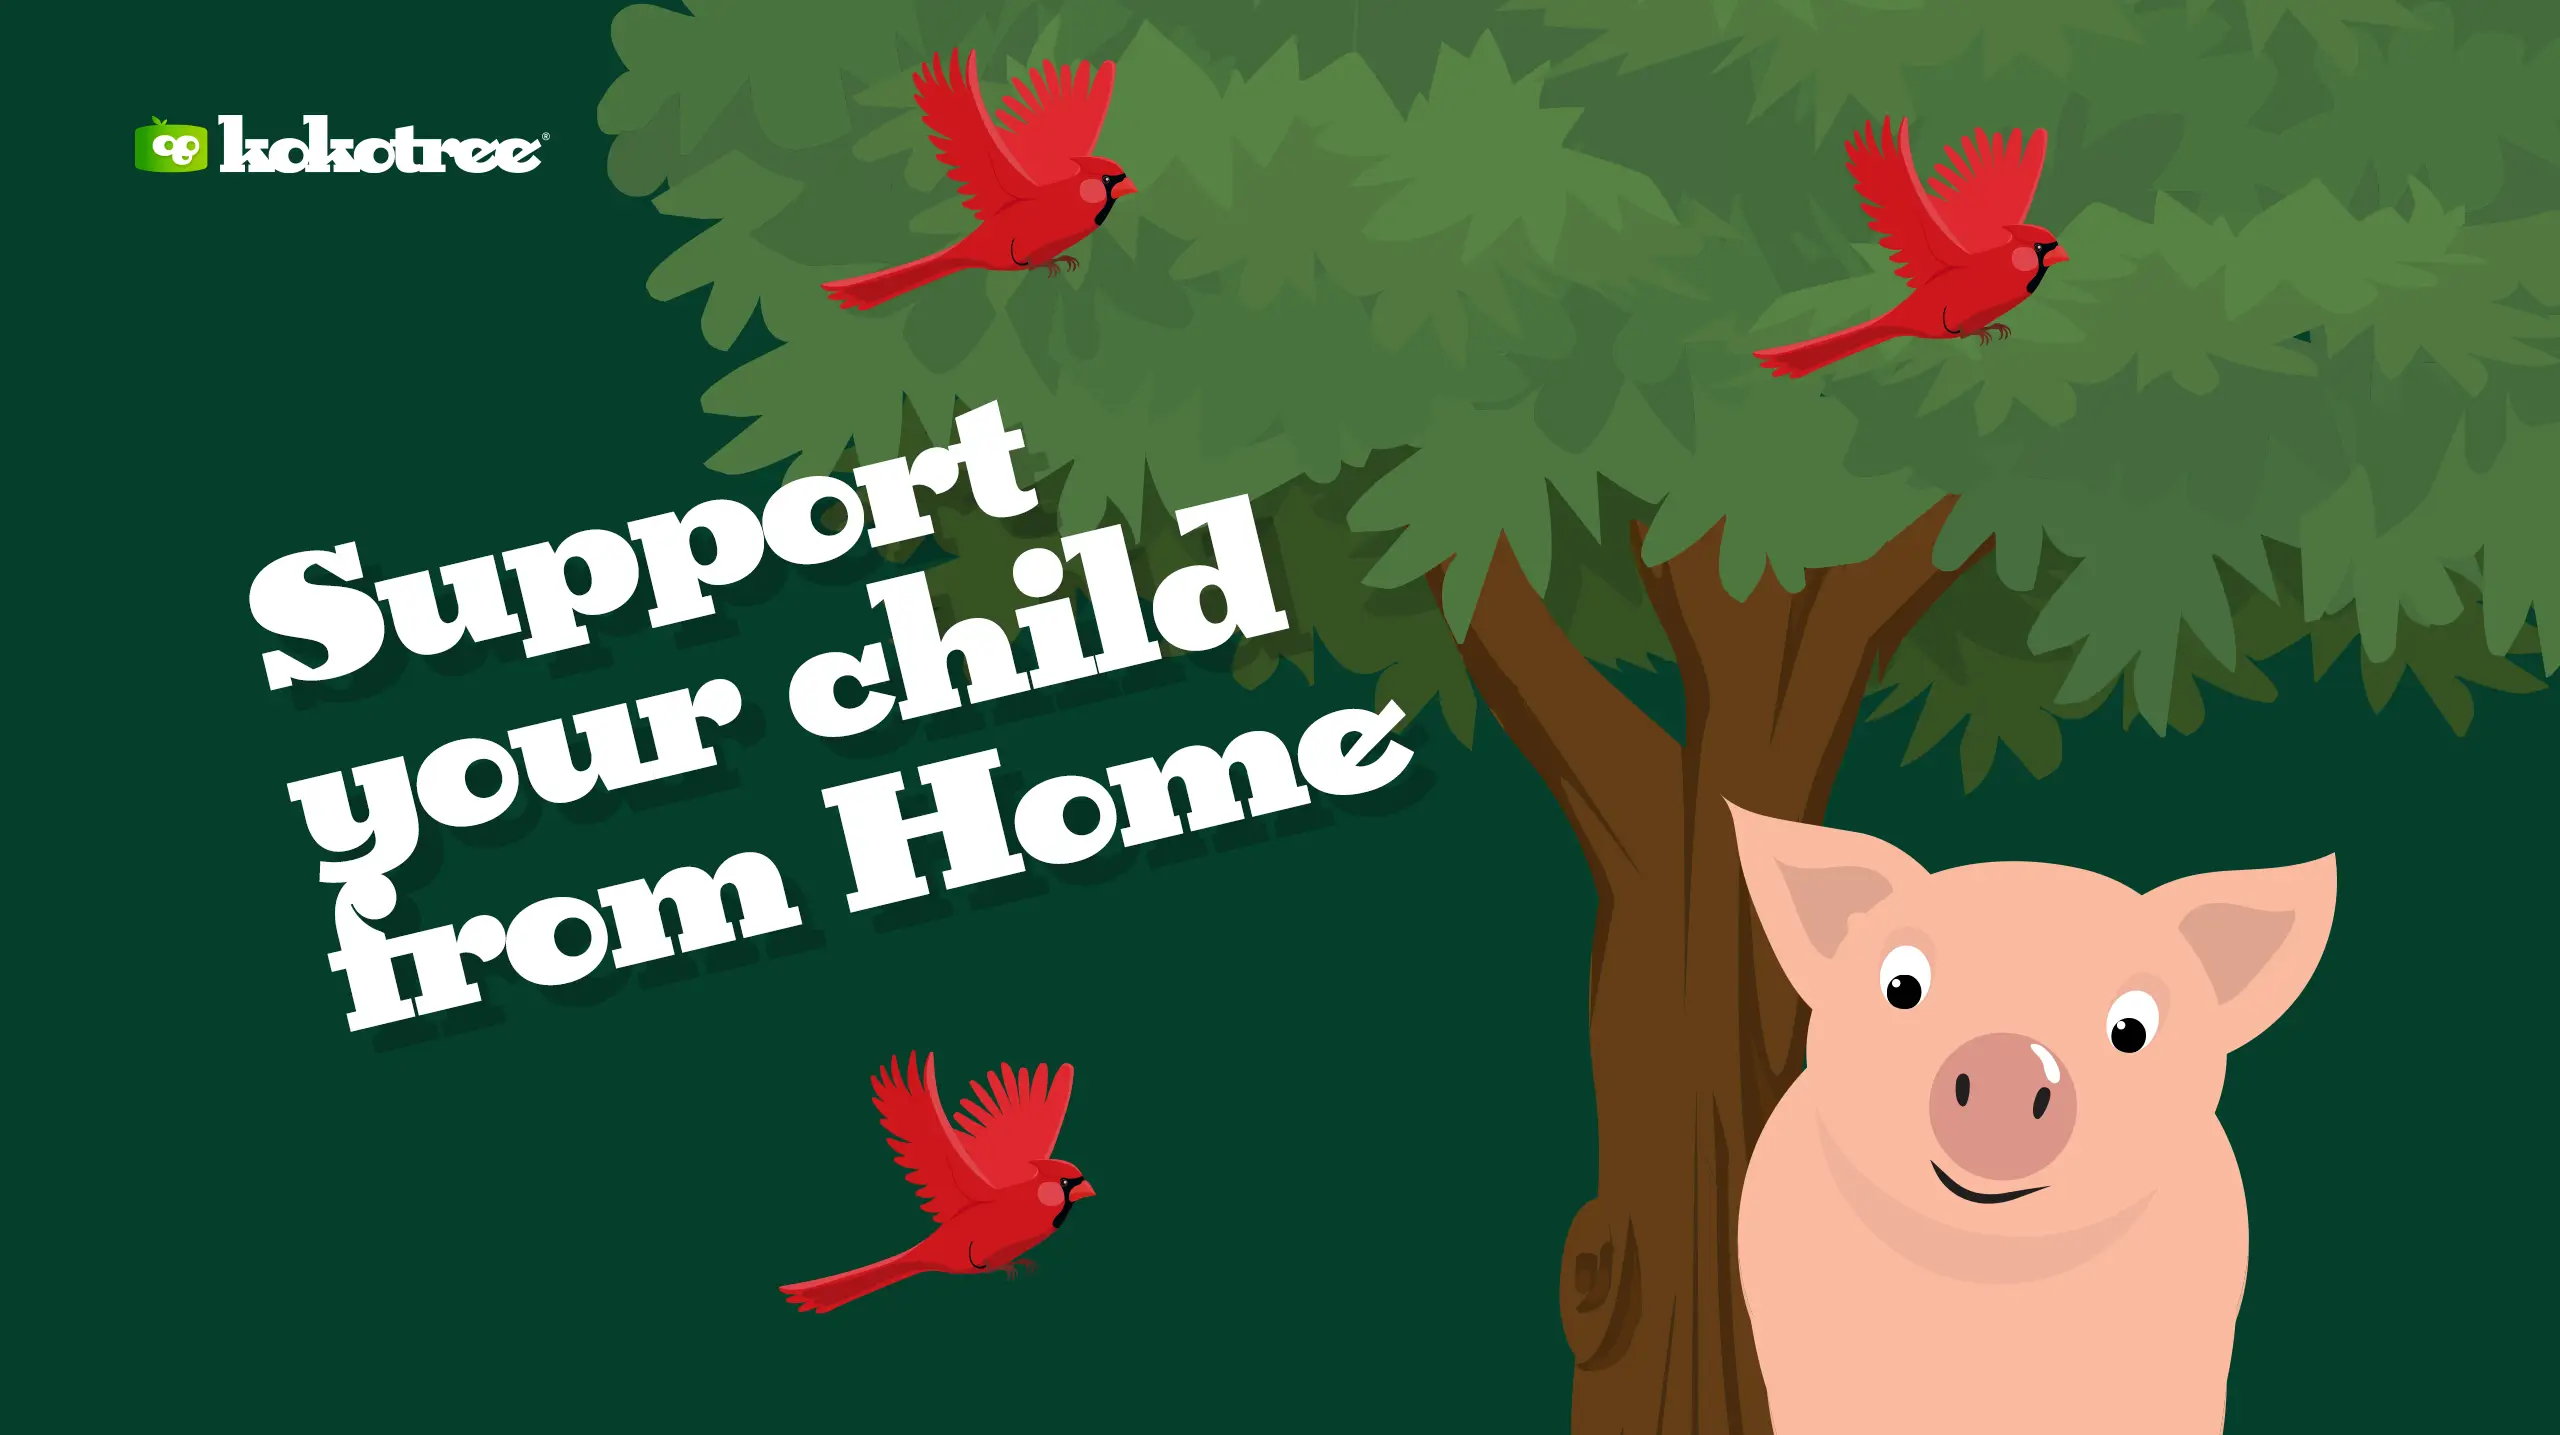 What are some things you can do at home to support your child’s preschool experience?